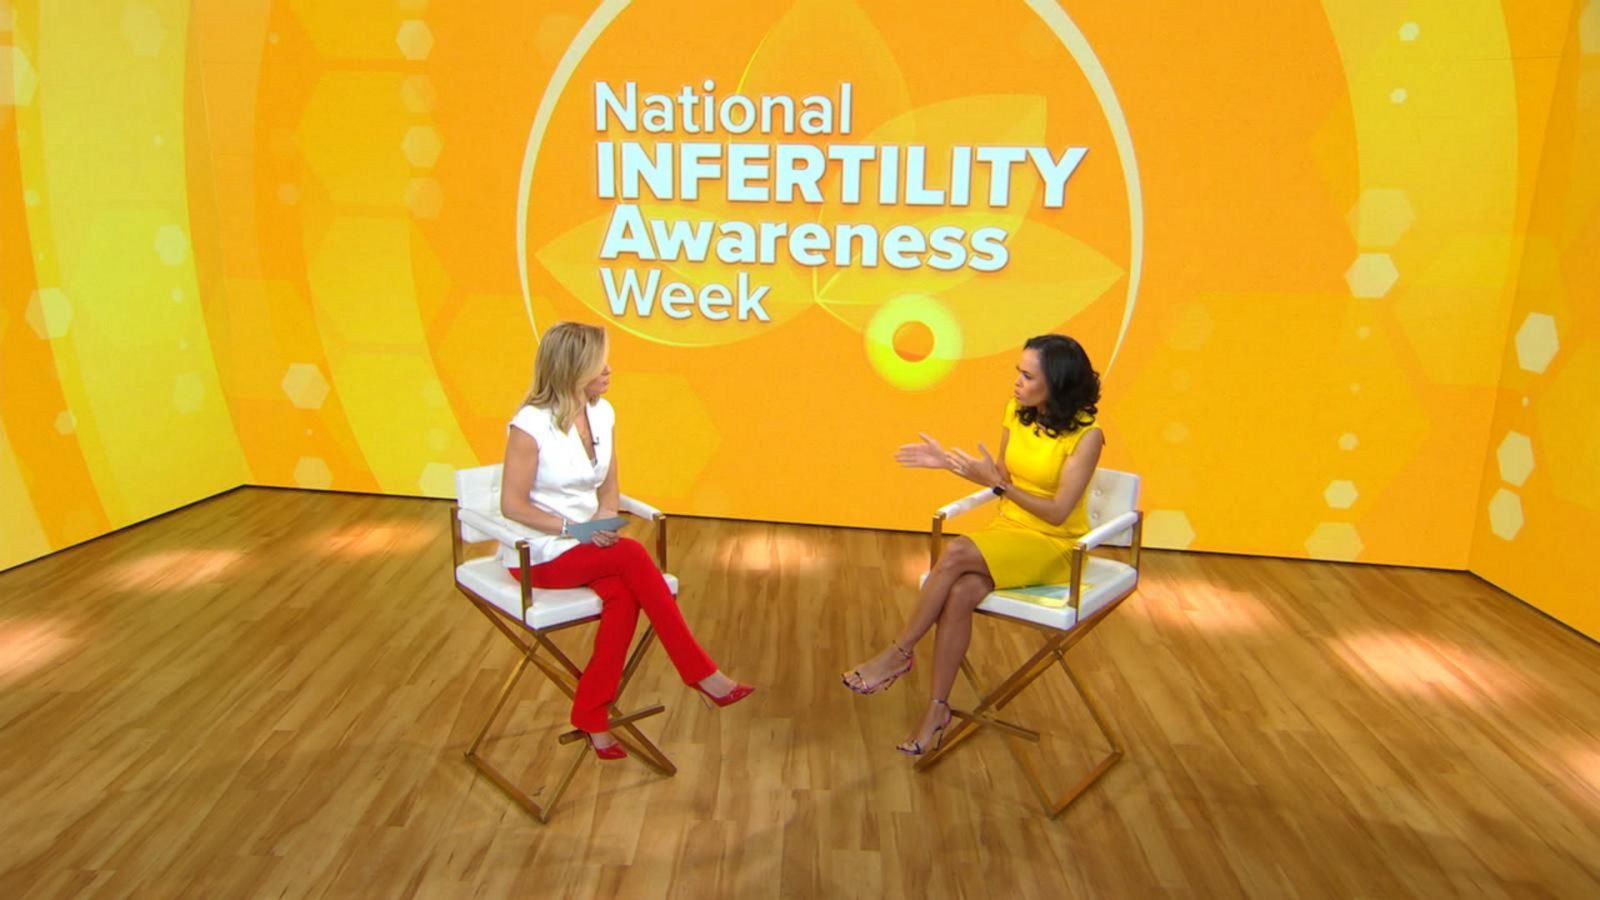 VIDEO: The state of infertility in the US